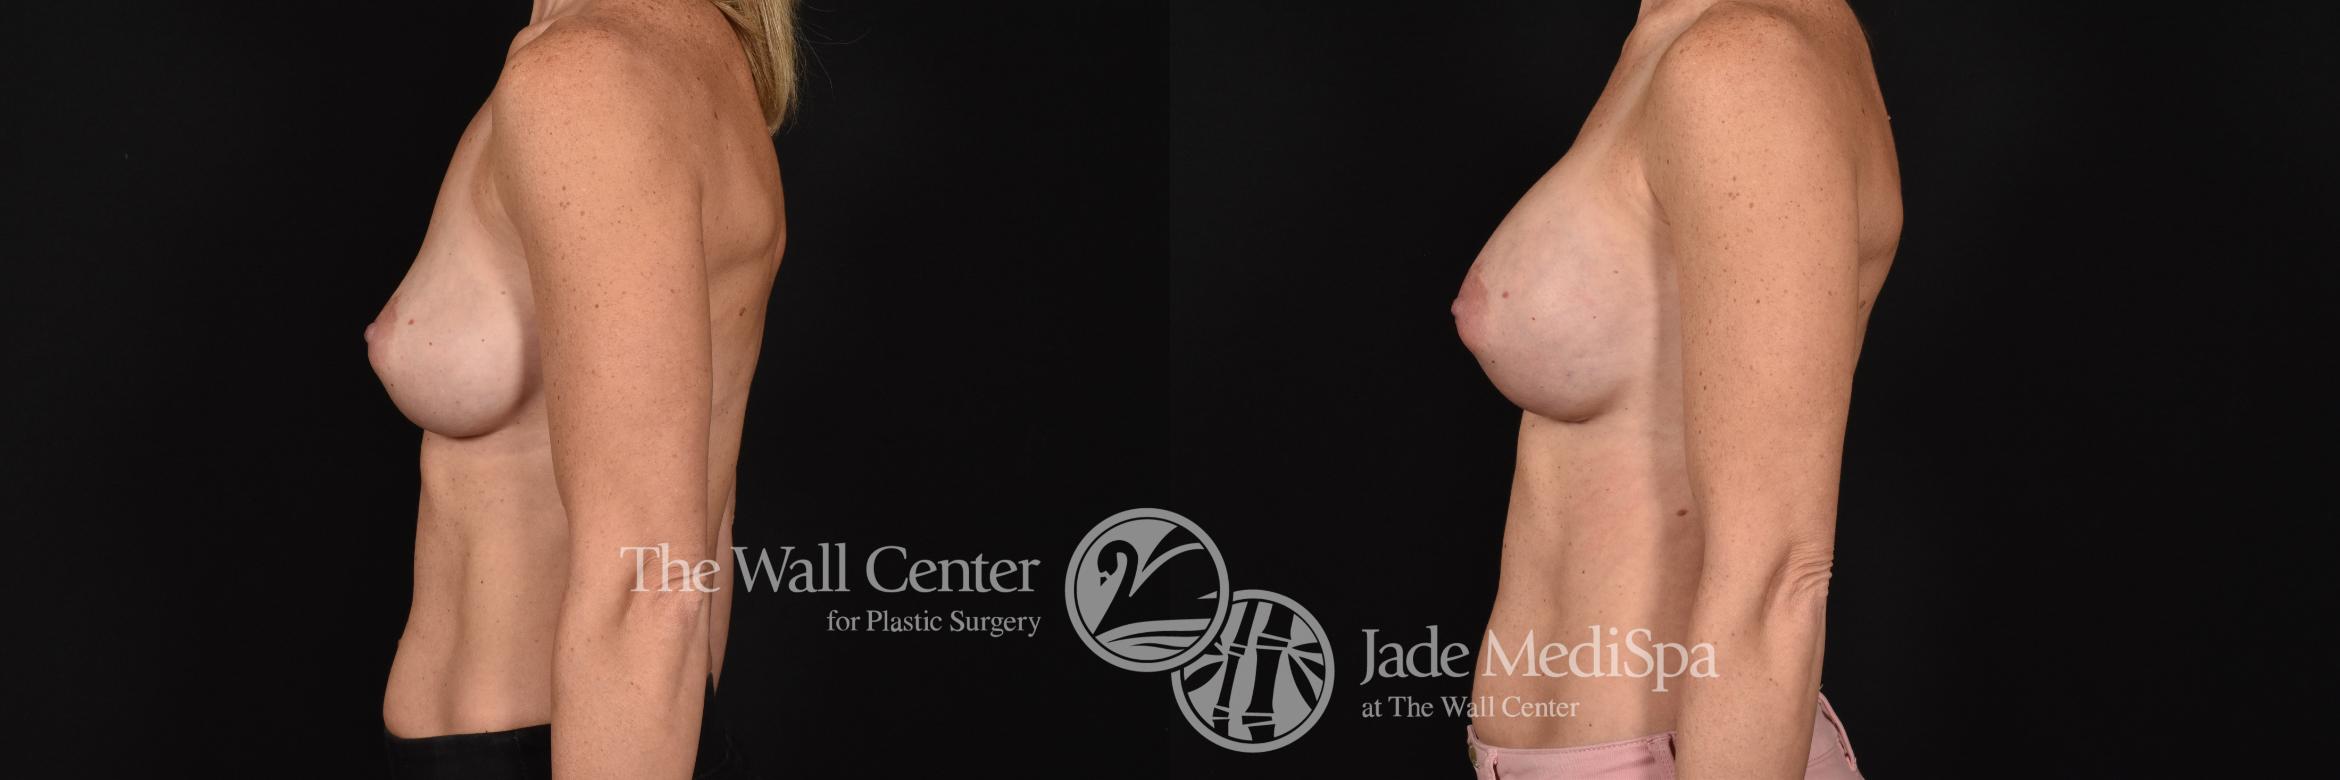 Breast Implant Exchange Left Side Photo, Shreveport, Louisiana, The Wall Center for Plastic Surgery, Case 868